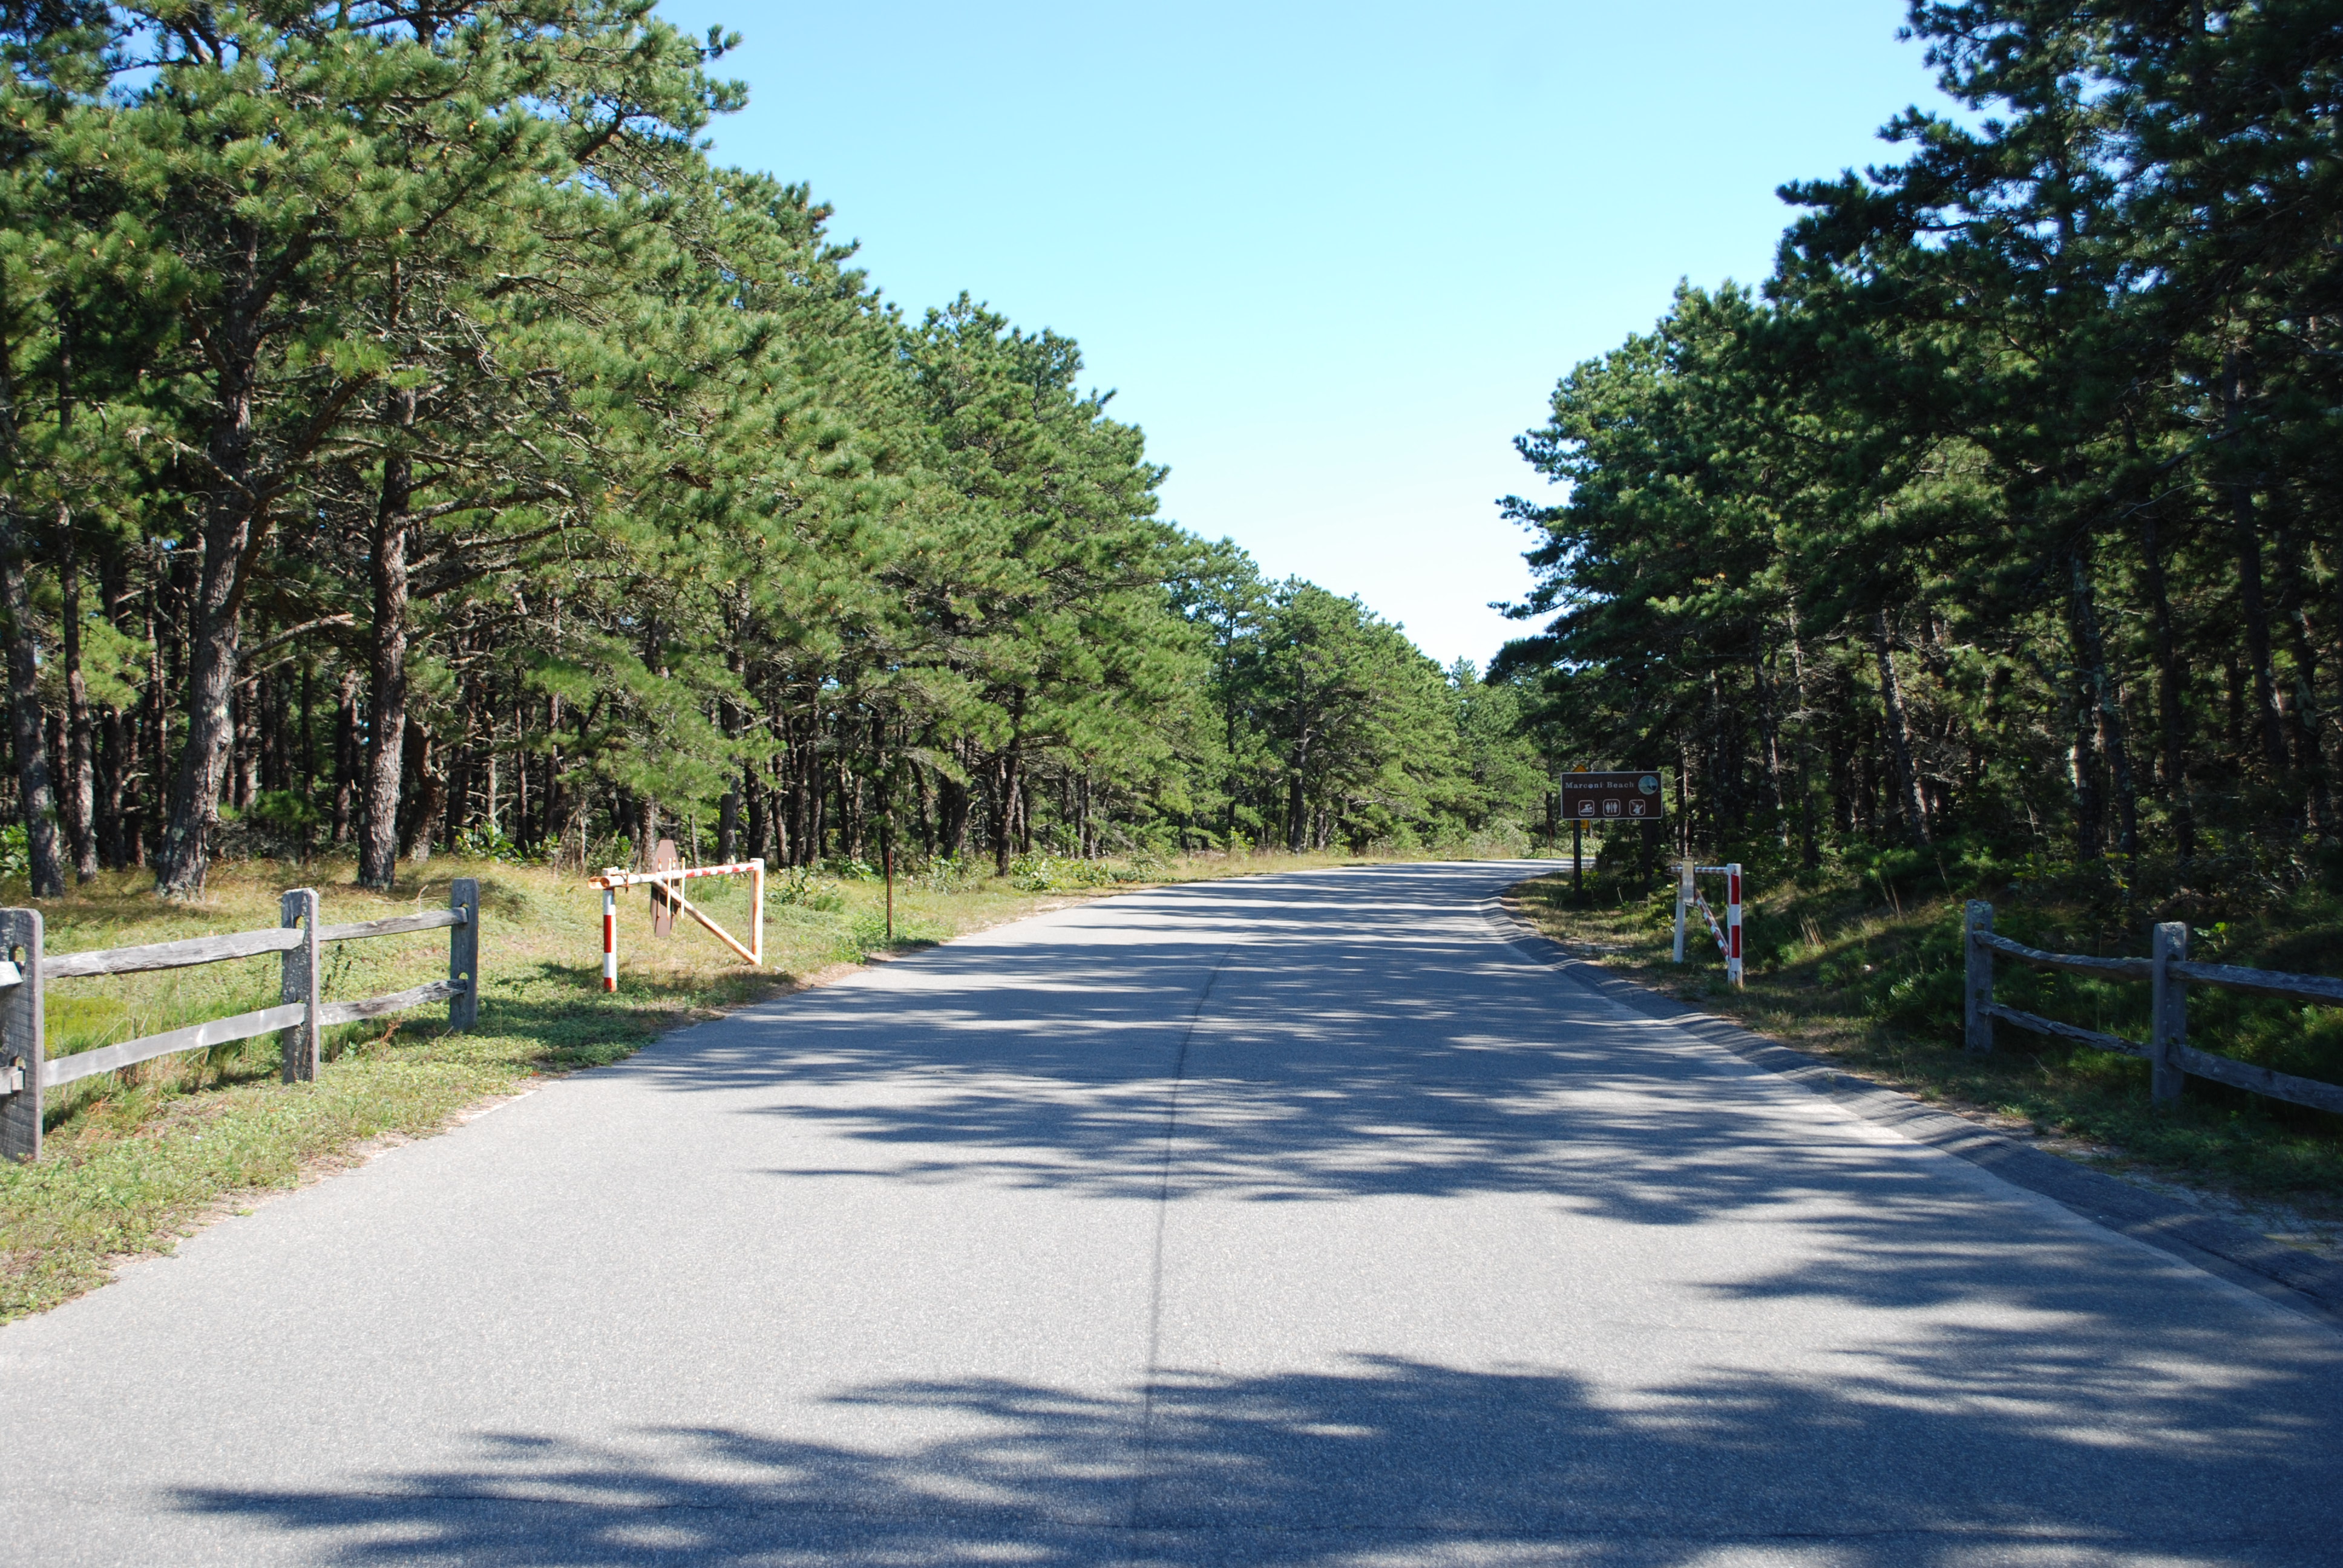 marconi beach road with pine trees along the sides